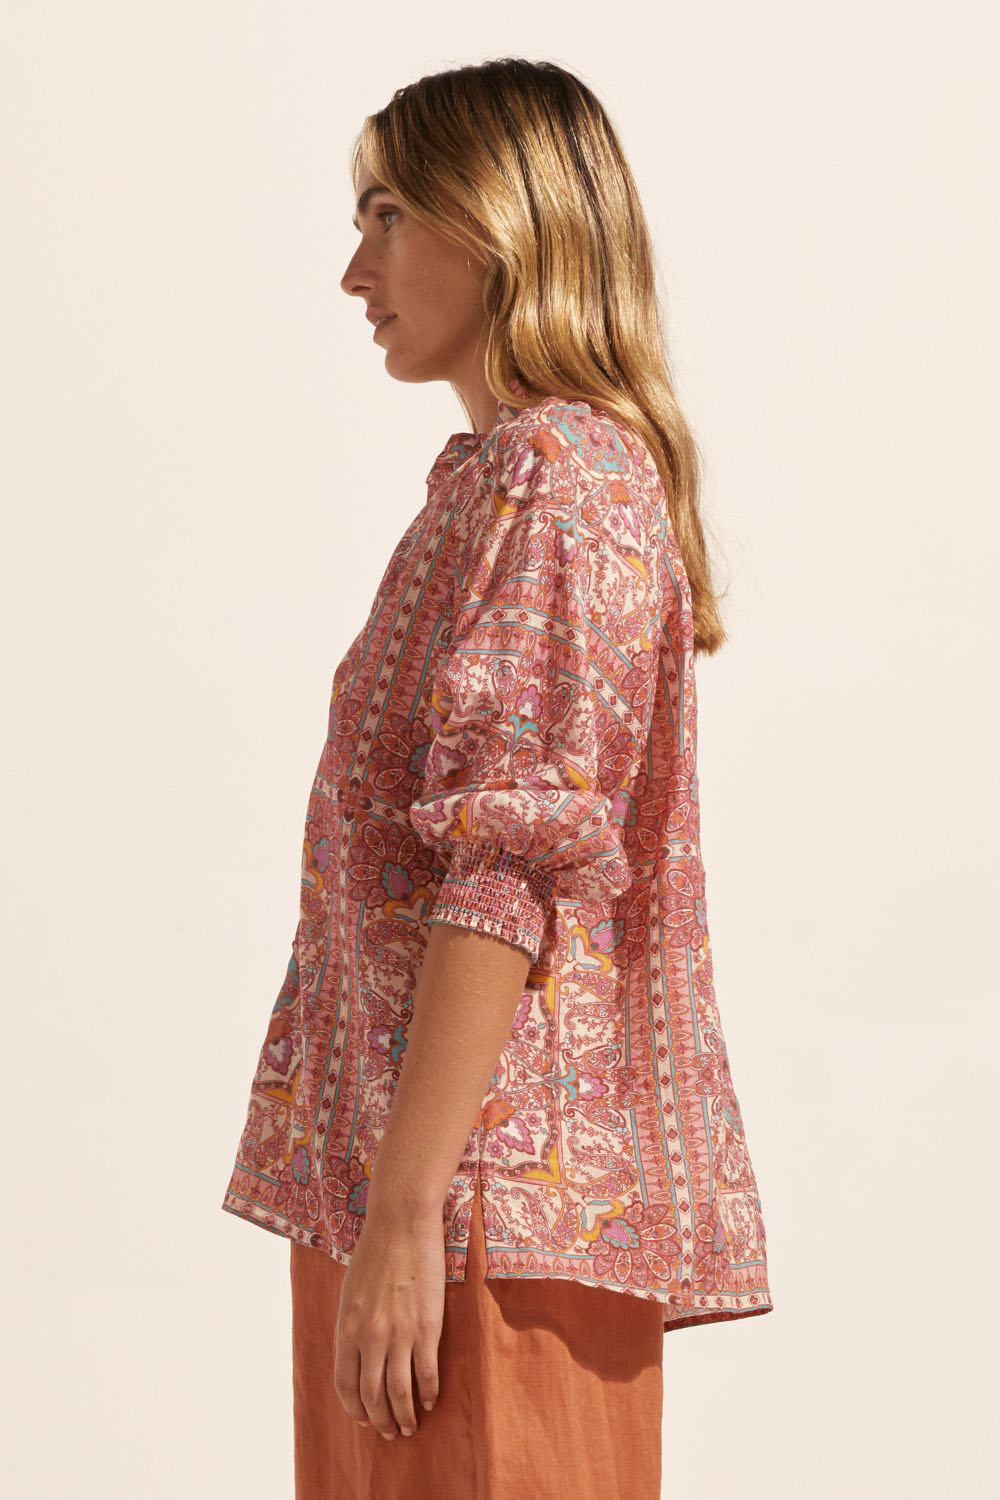 pink print, medium length sleeve, buttons down centre, small side splits, high neck, side image